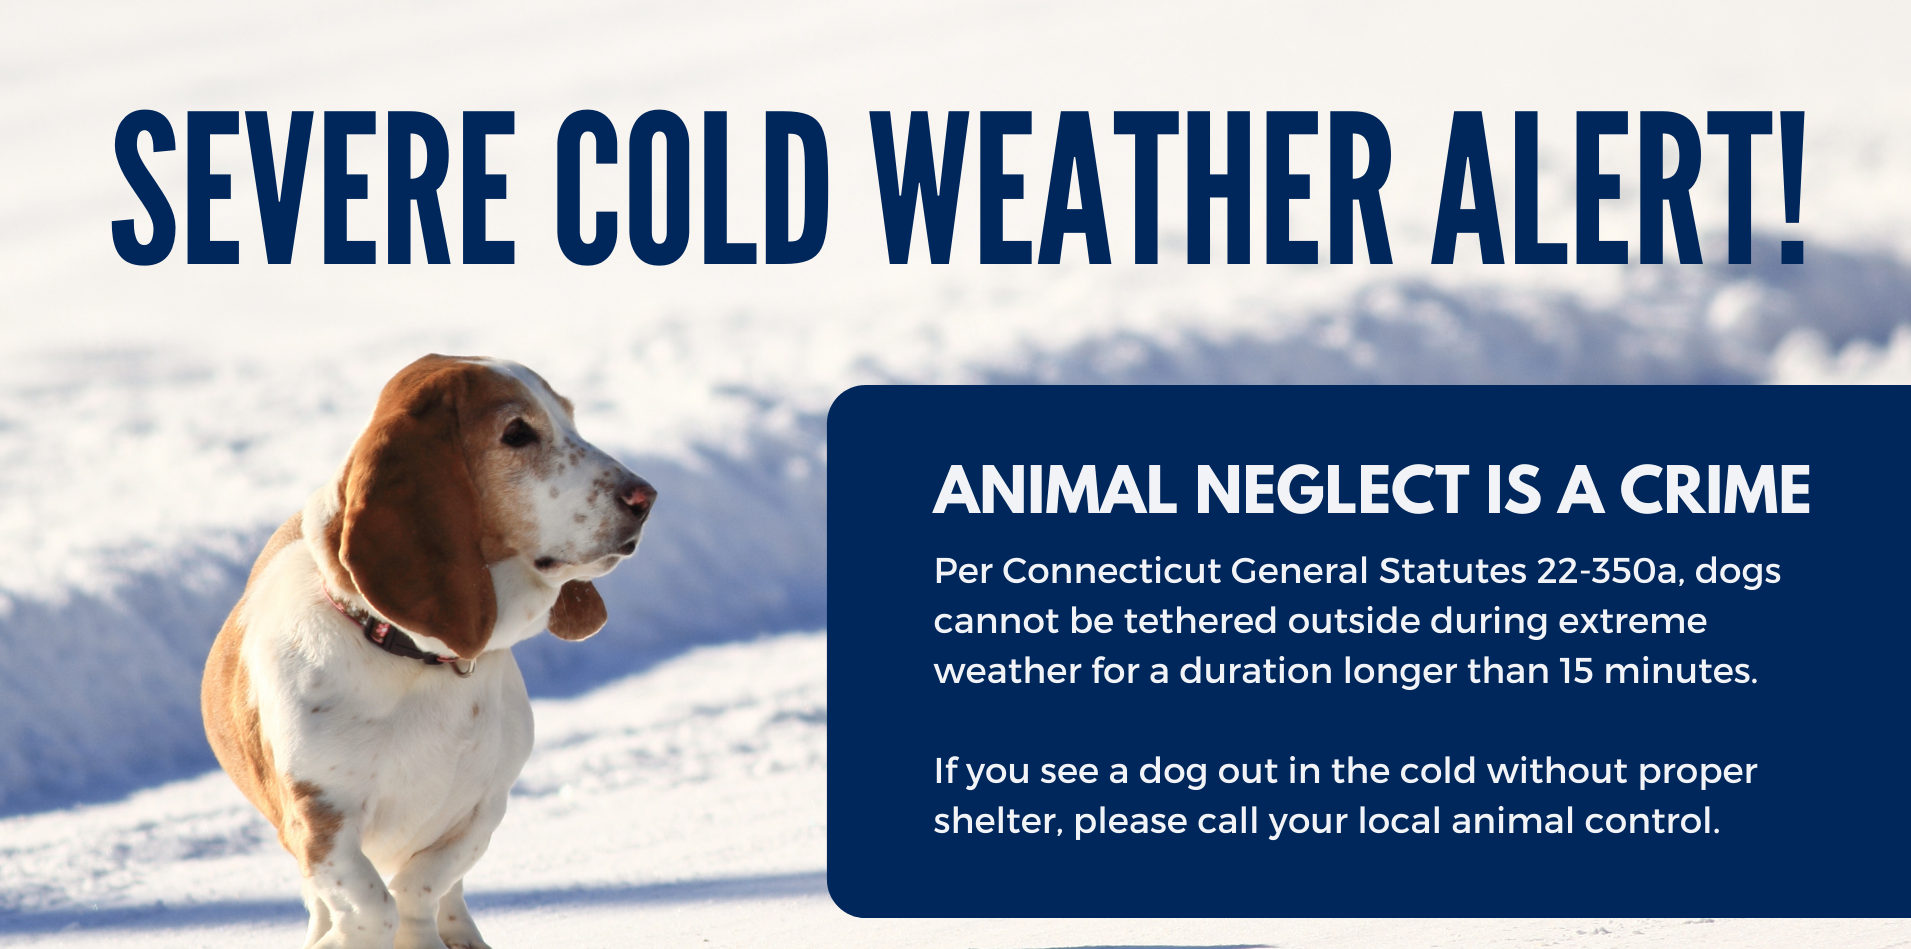 Please do not leave your pets outside in cold weather, it's a crime.